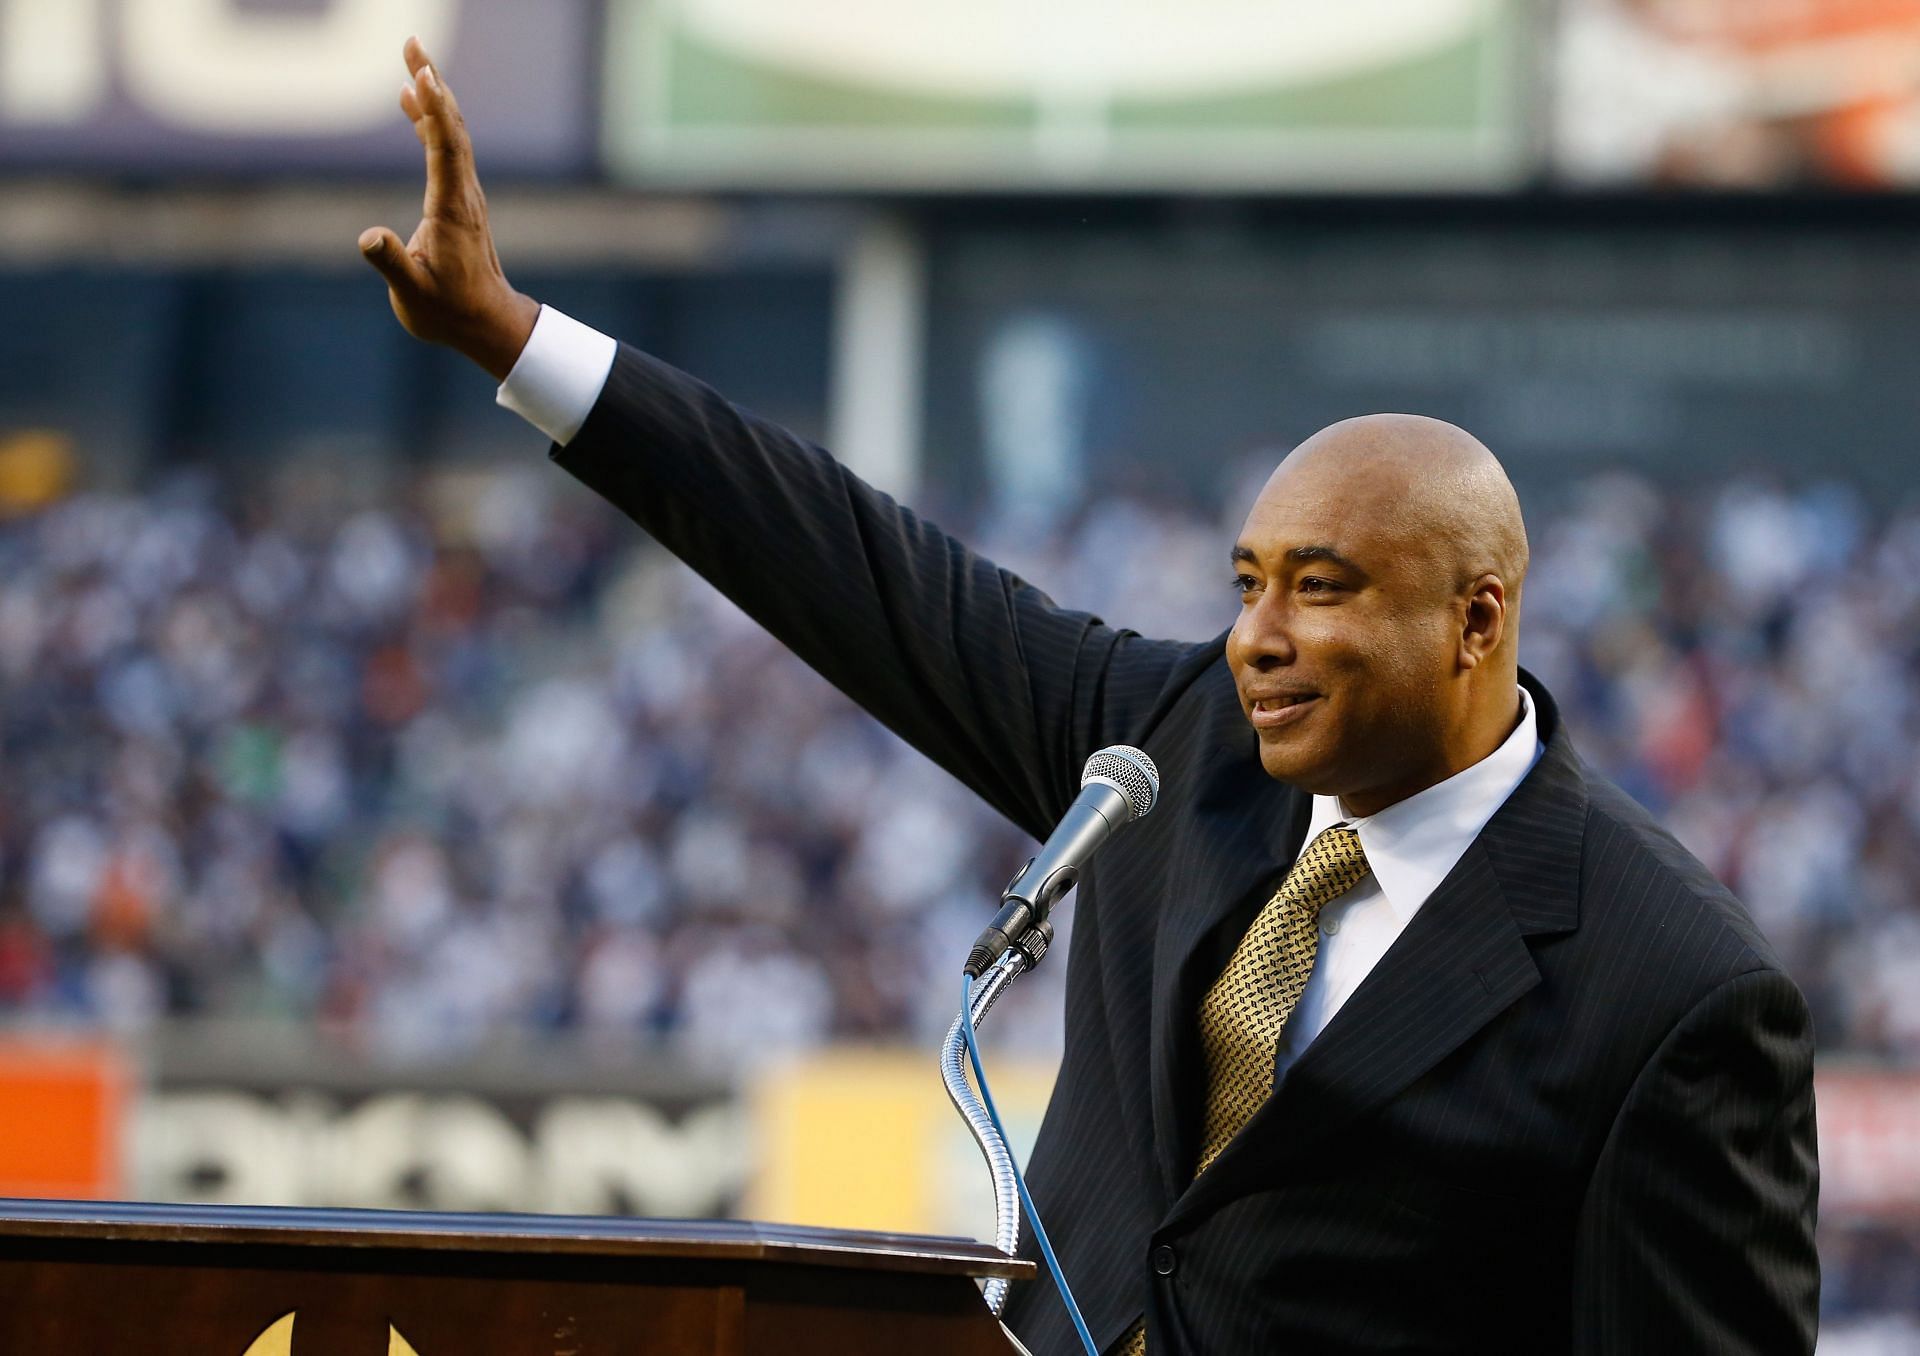 Bernie Williams spent his 16-year career with the New York Yankees